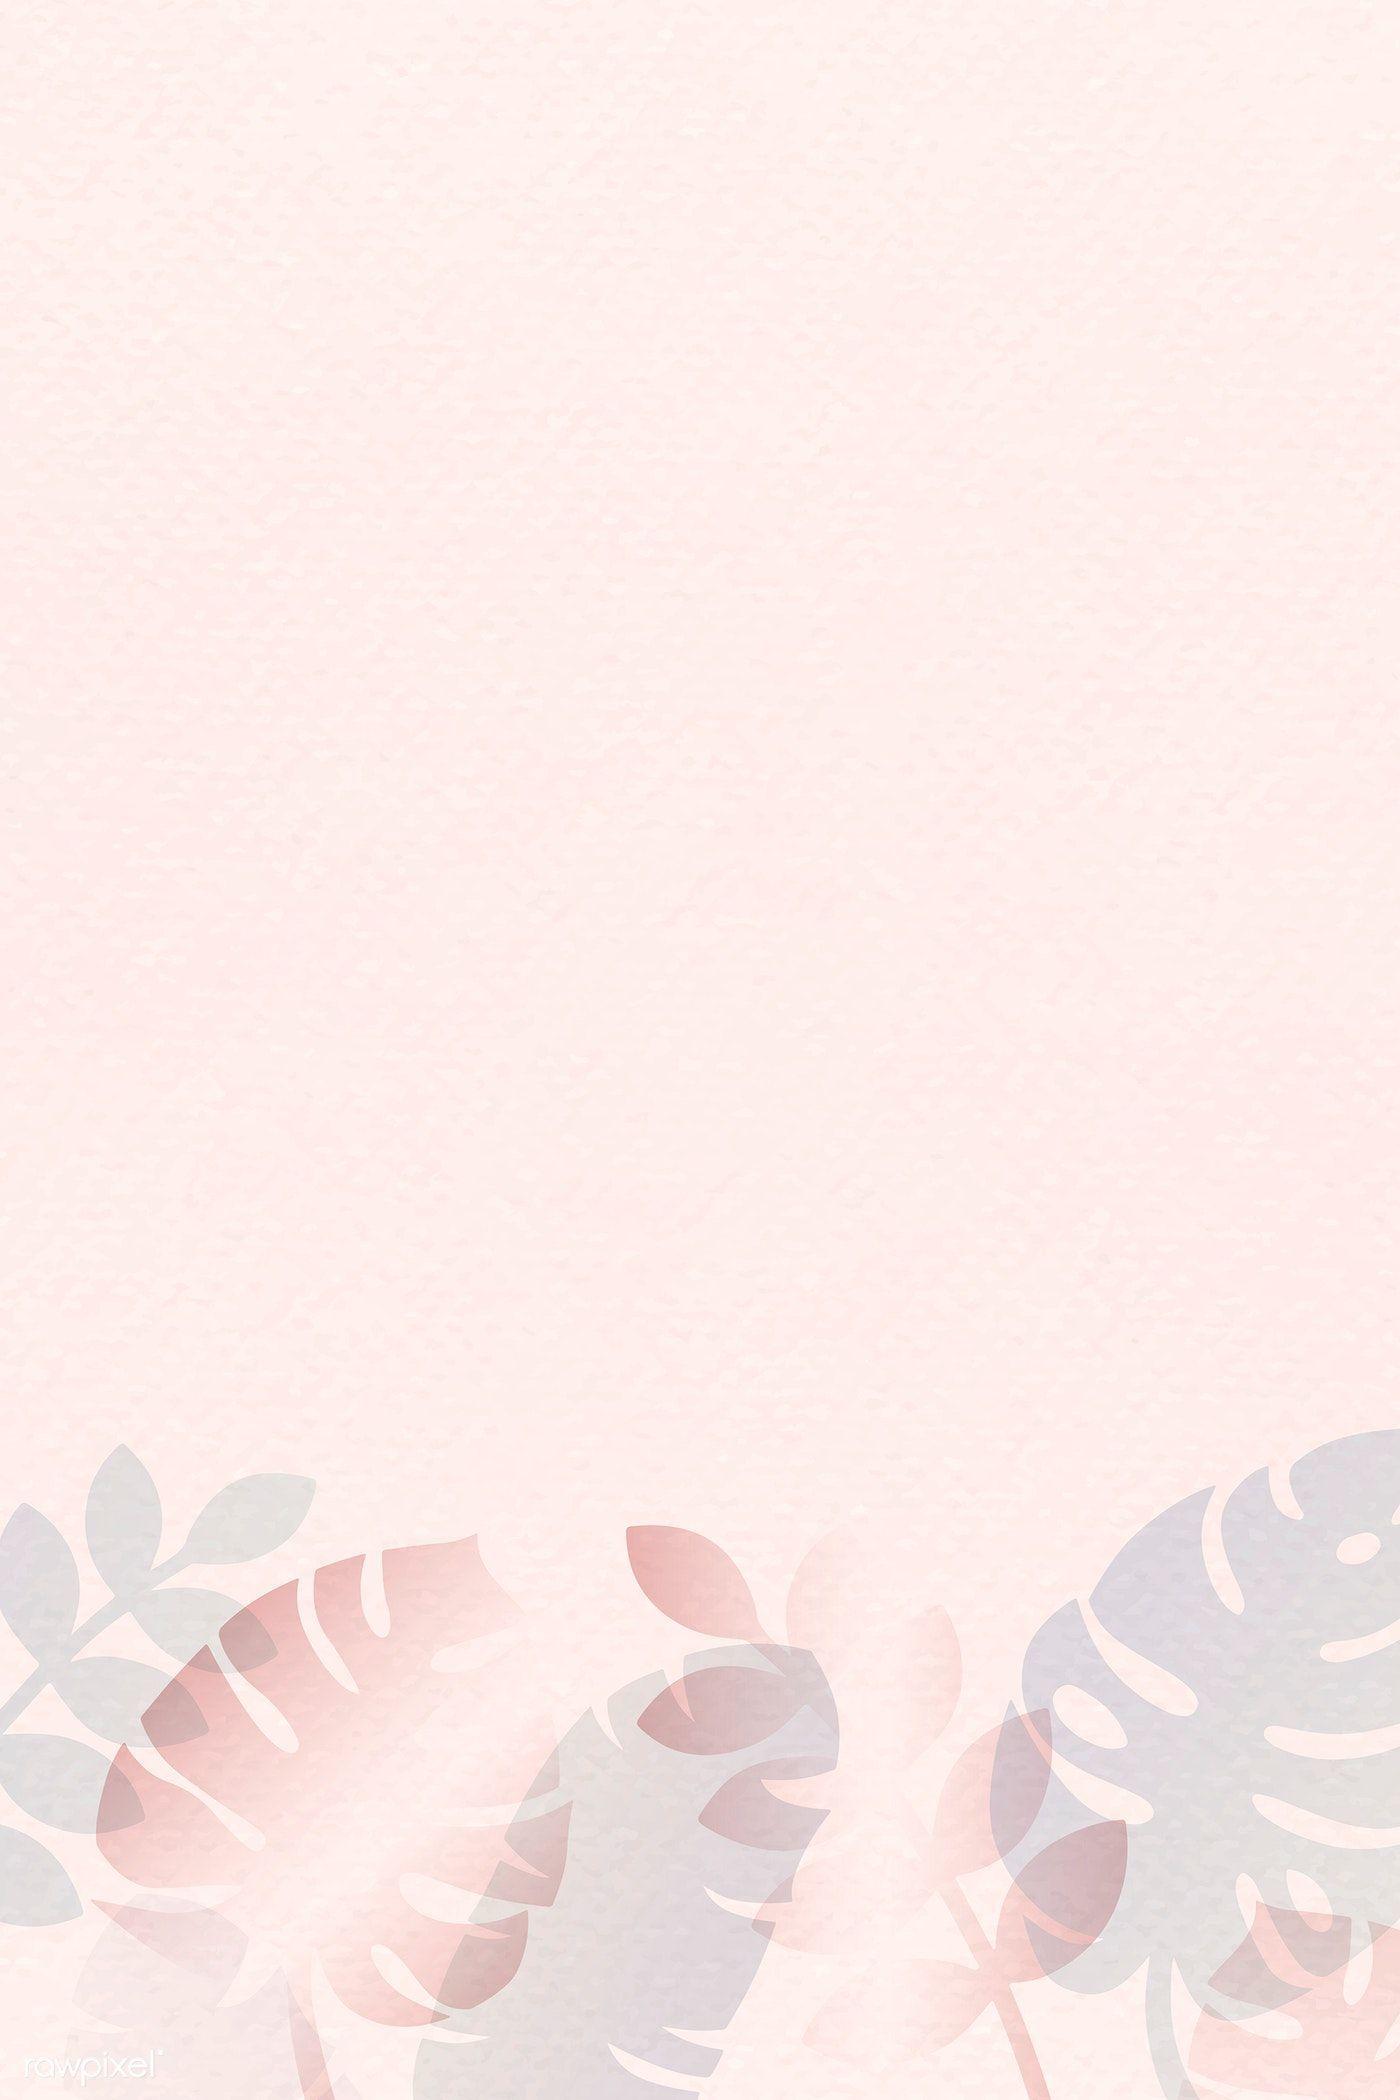 Cute Light Pink Pastel Wallpapers - Top Free Cute Light Pink Pastel  Backgrounds - WallpaperAccess